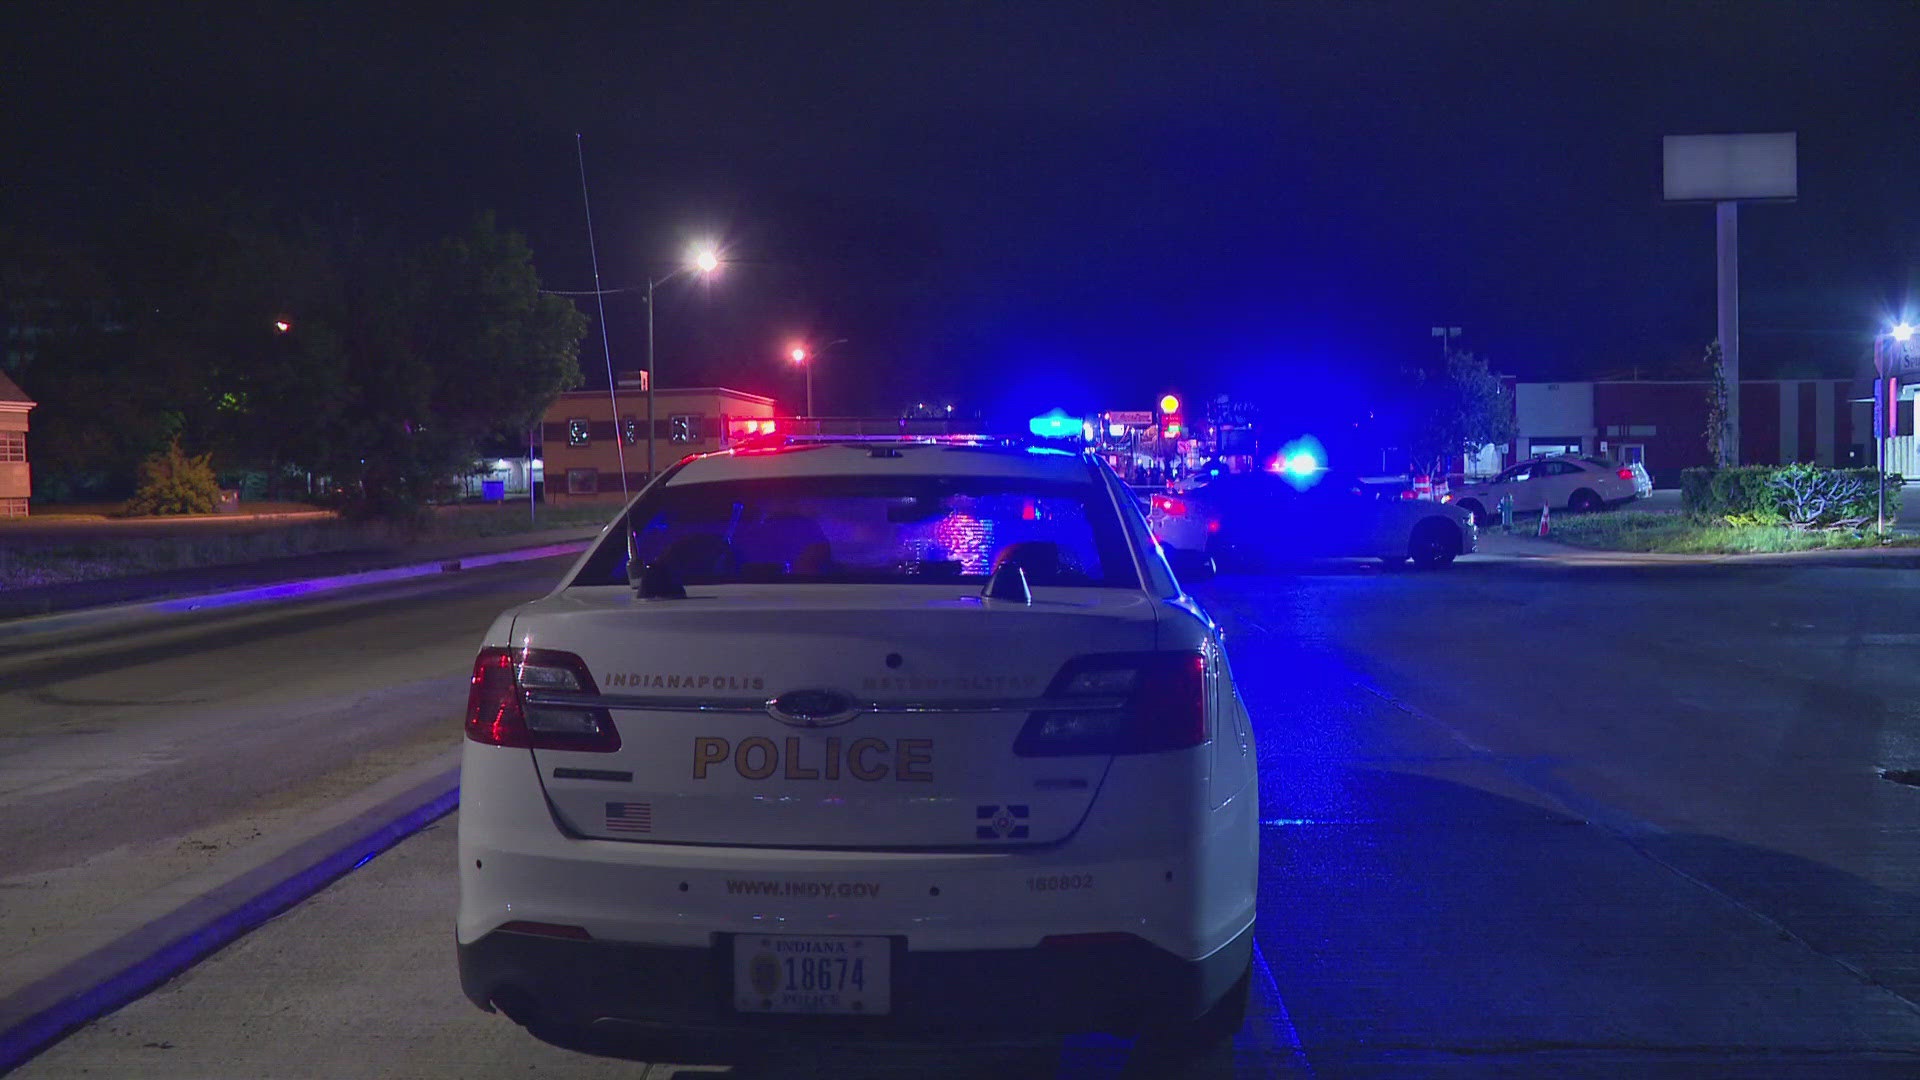 IMPD officers responded to a report of a person down along 38th Street around 1:30 a.m. Thursday.